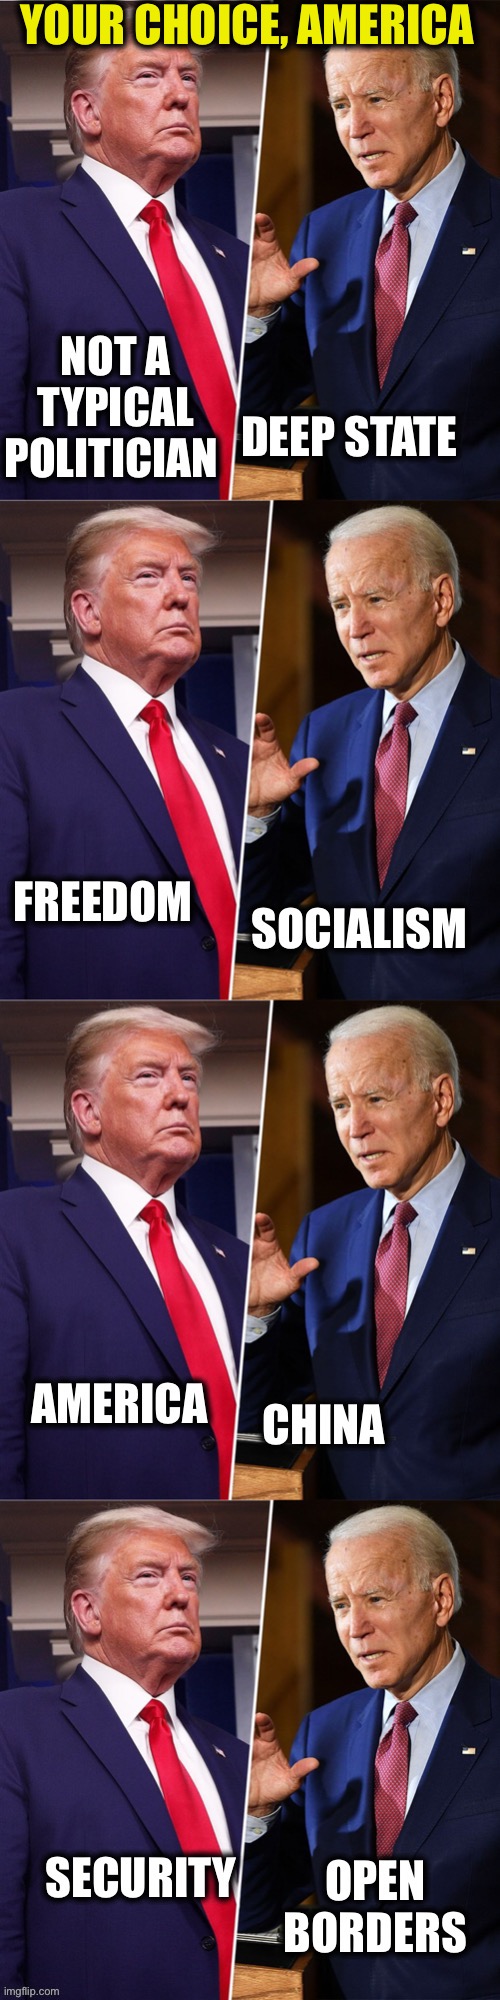 This is not a Democrat vs Republican election | YOUR CHOICE, AMERICA | image tagged in president trump,joe biden,democrats,republicans,memes,election 2020 | made w/ Imgflip meme maker